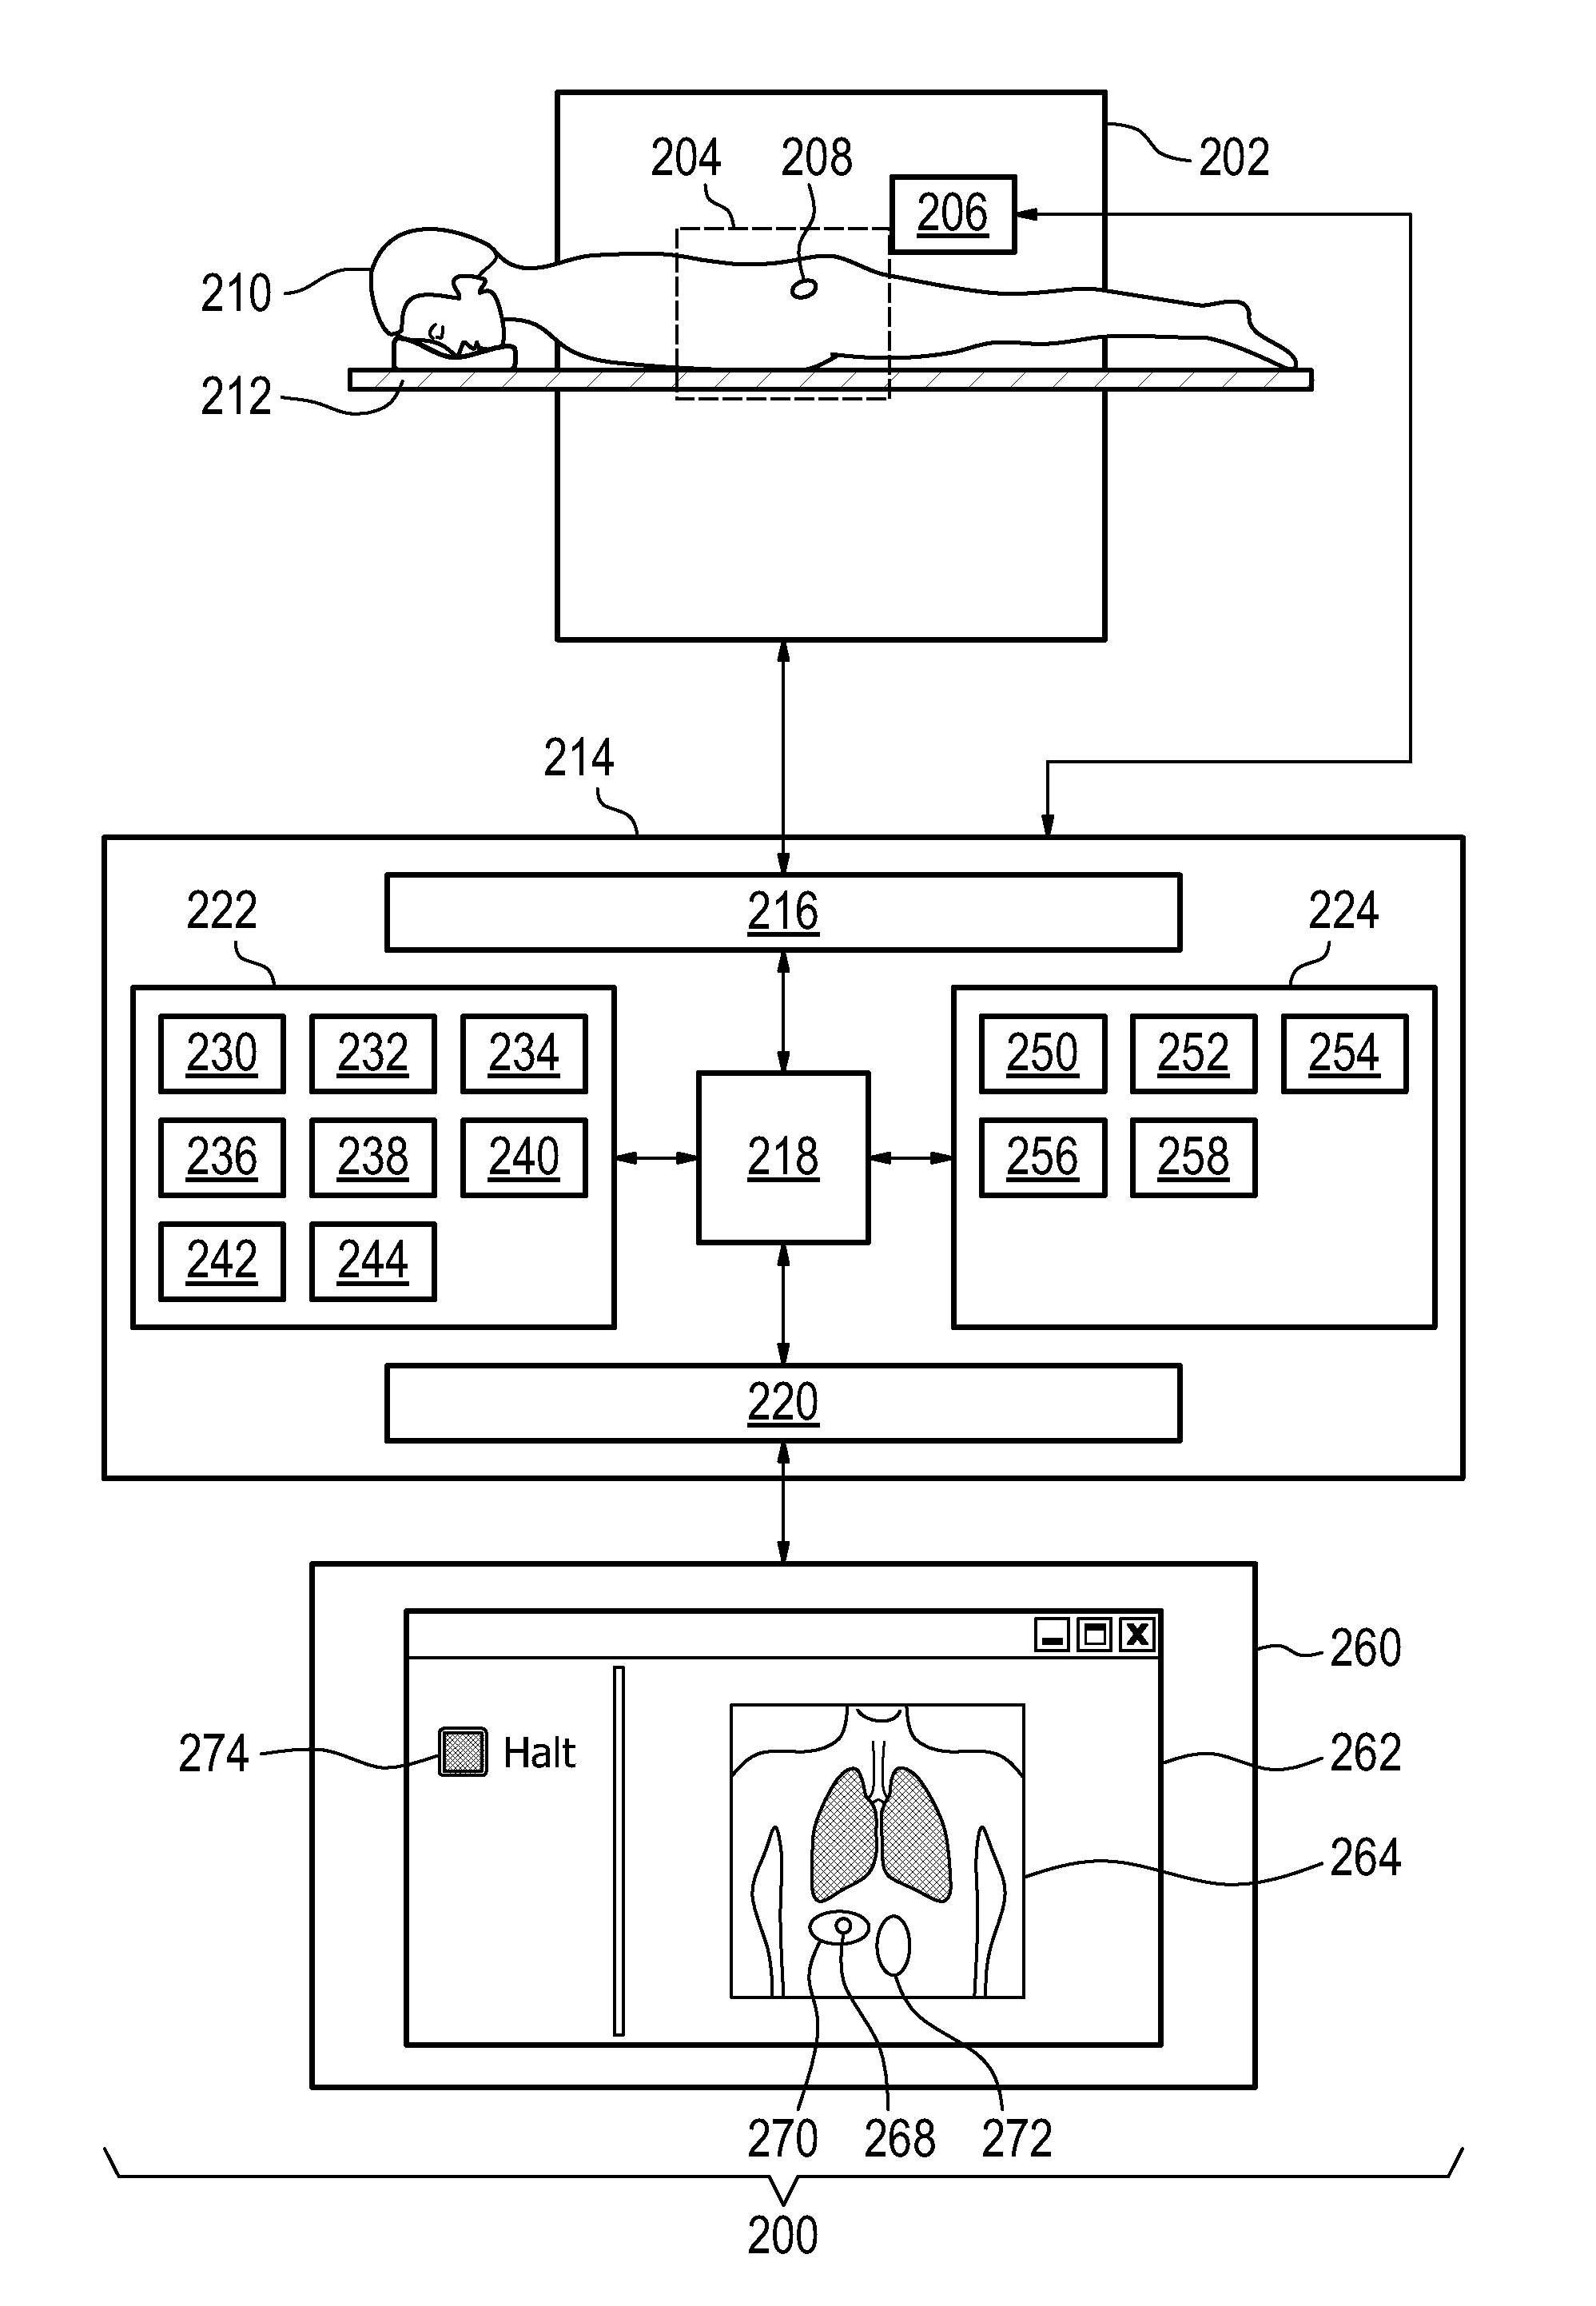 Graphical user interface for medical instruments